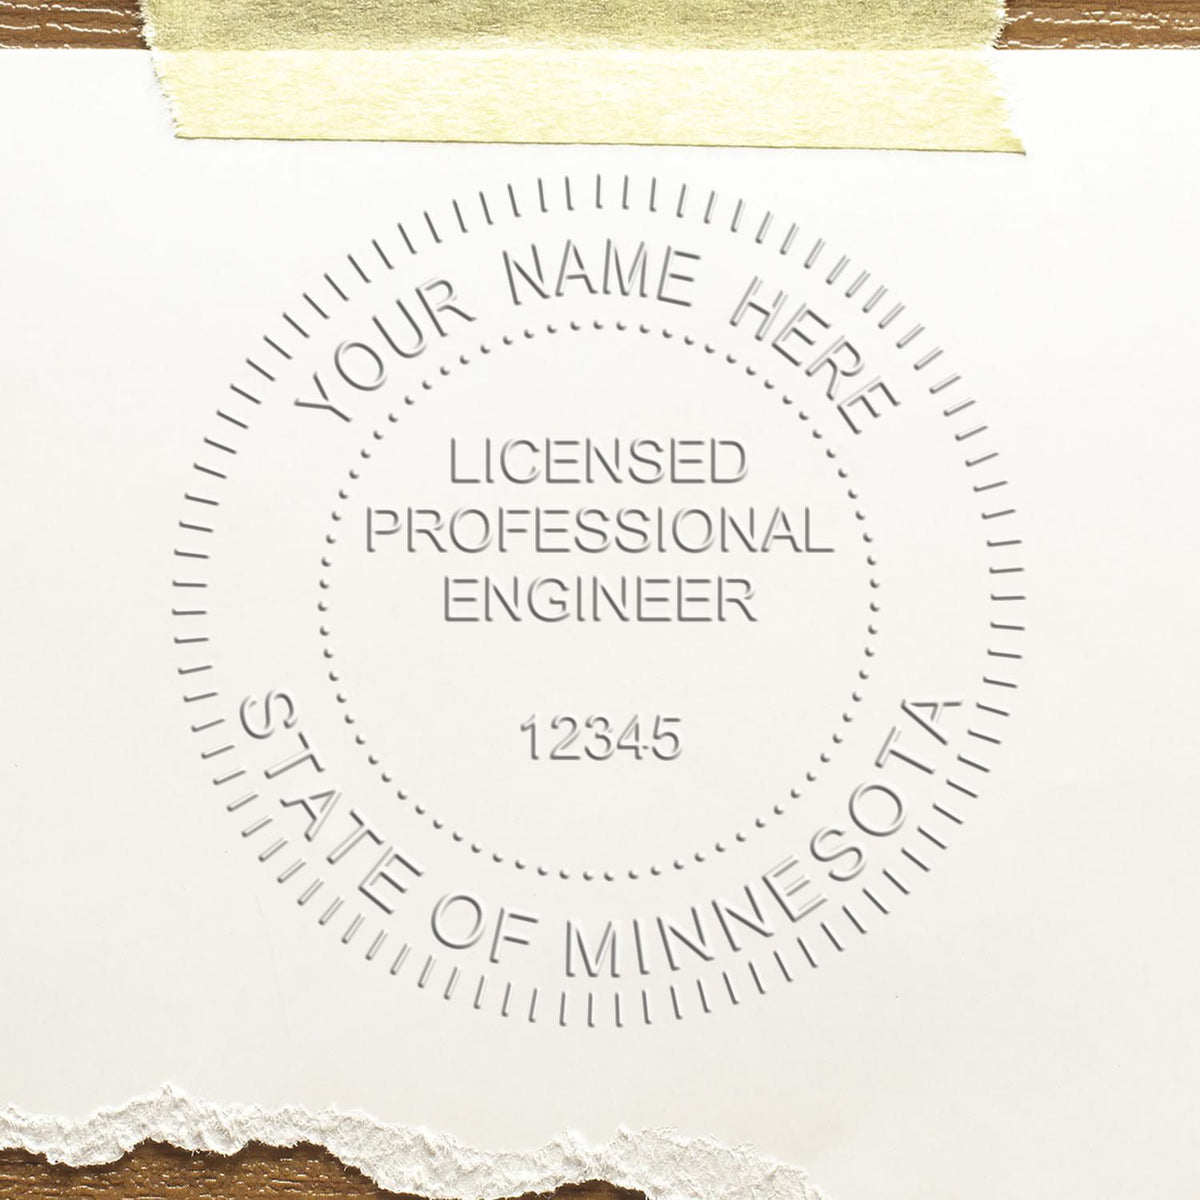 An alternative view of the State of Minnesota Extended Long Reach Engineer Seal stamped on a sheet of paper showing the image in use